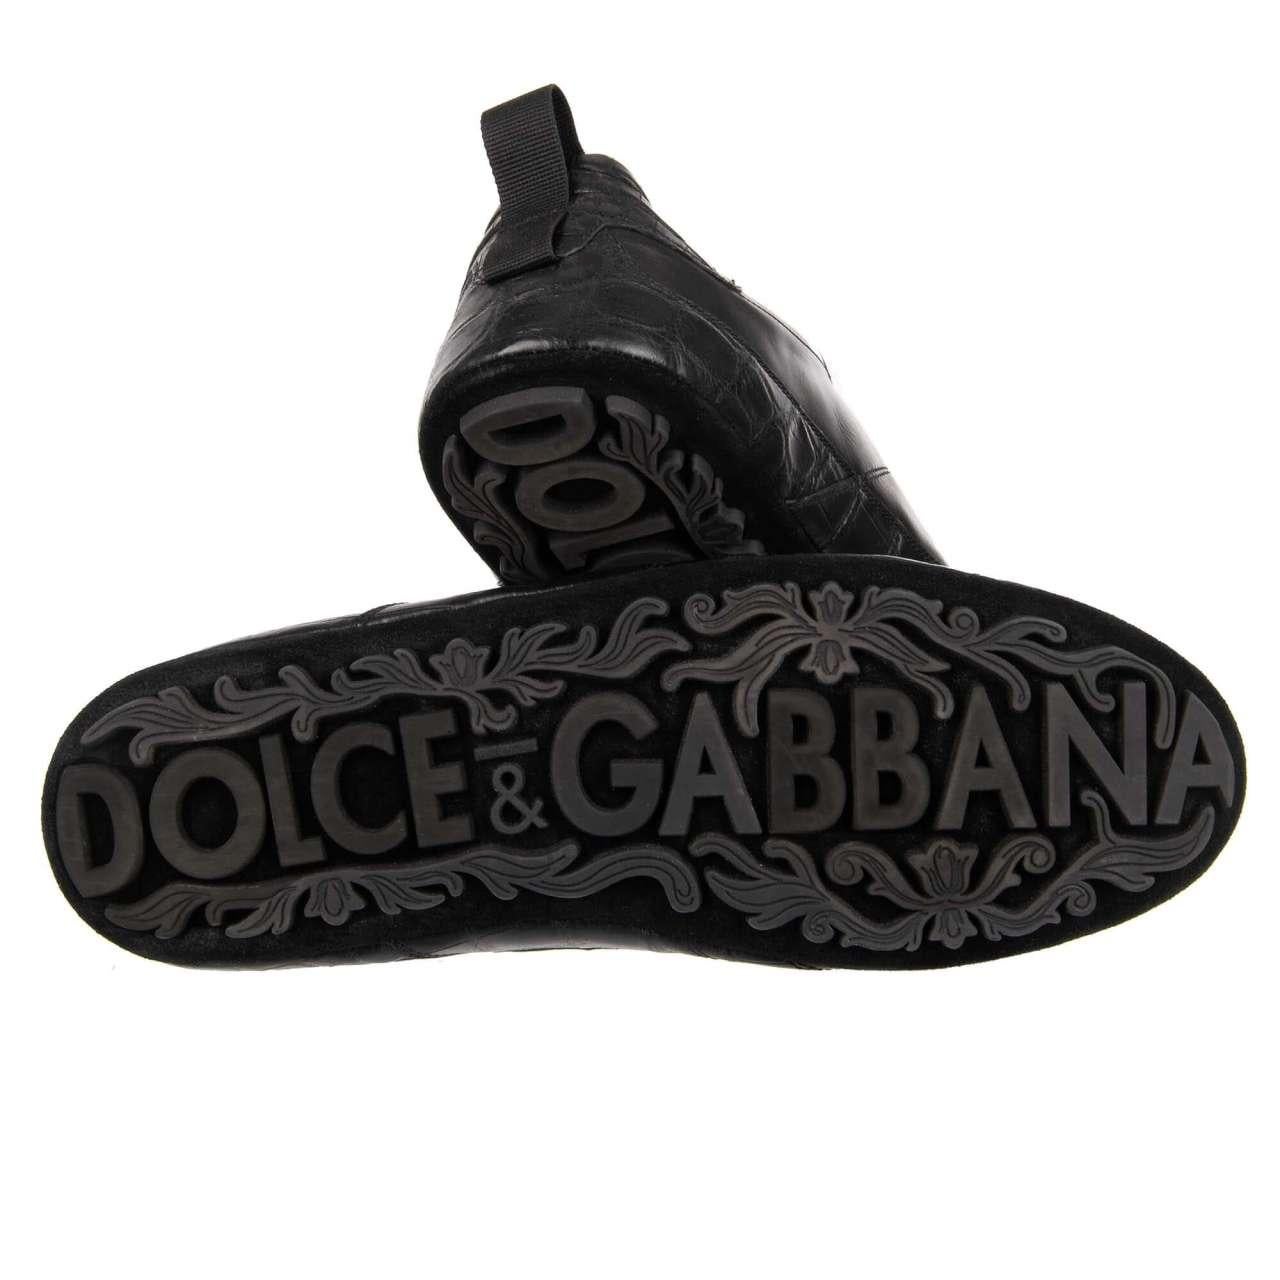 Dolce & Gabbana Low-Top Croco Sneaker KING DRIVER with Crown Black 44 UK 10 For Sale 1